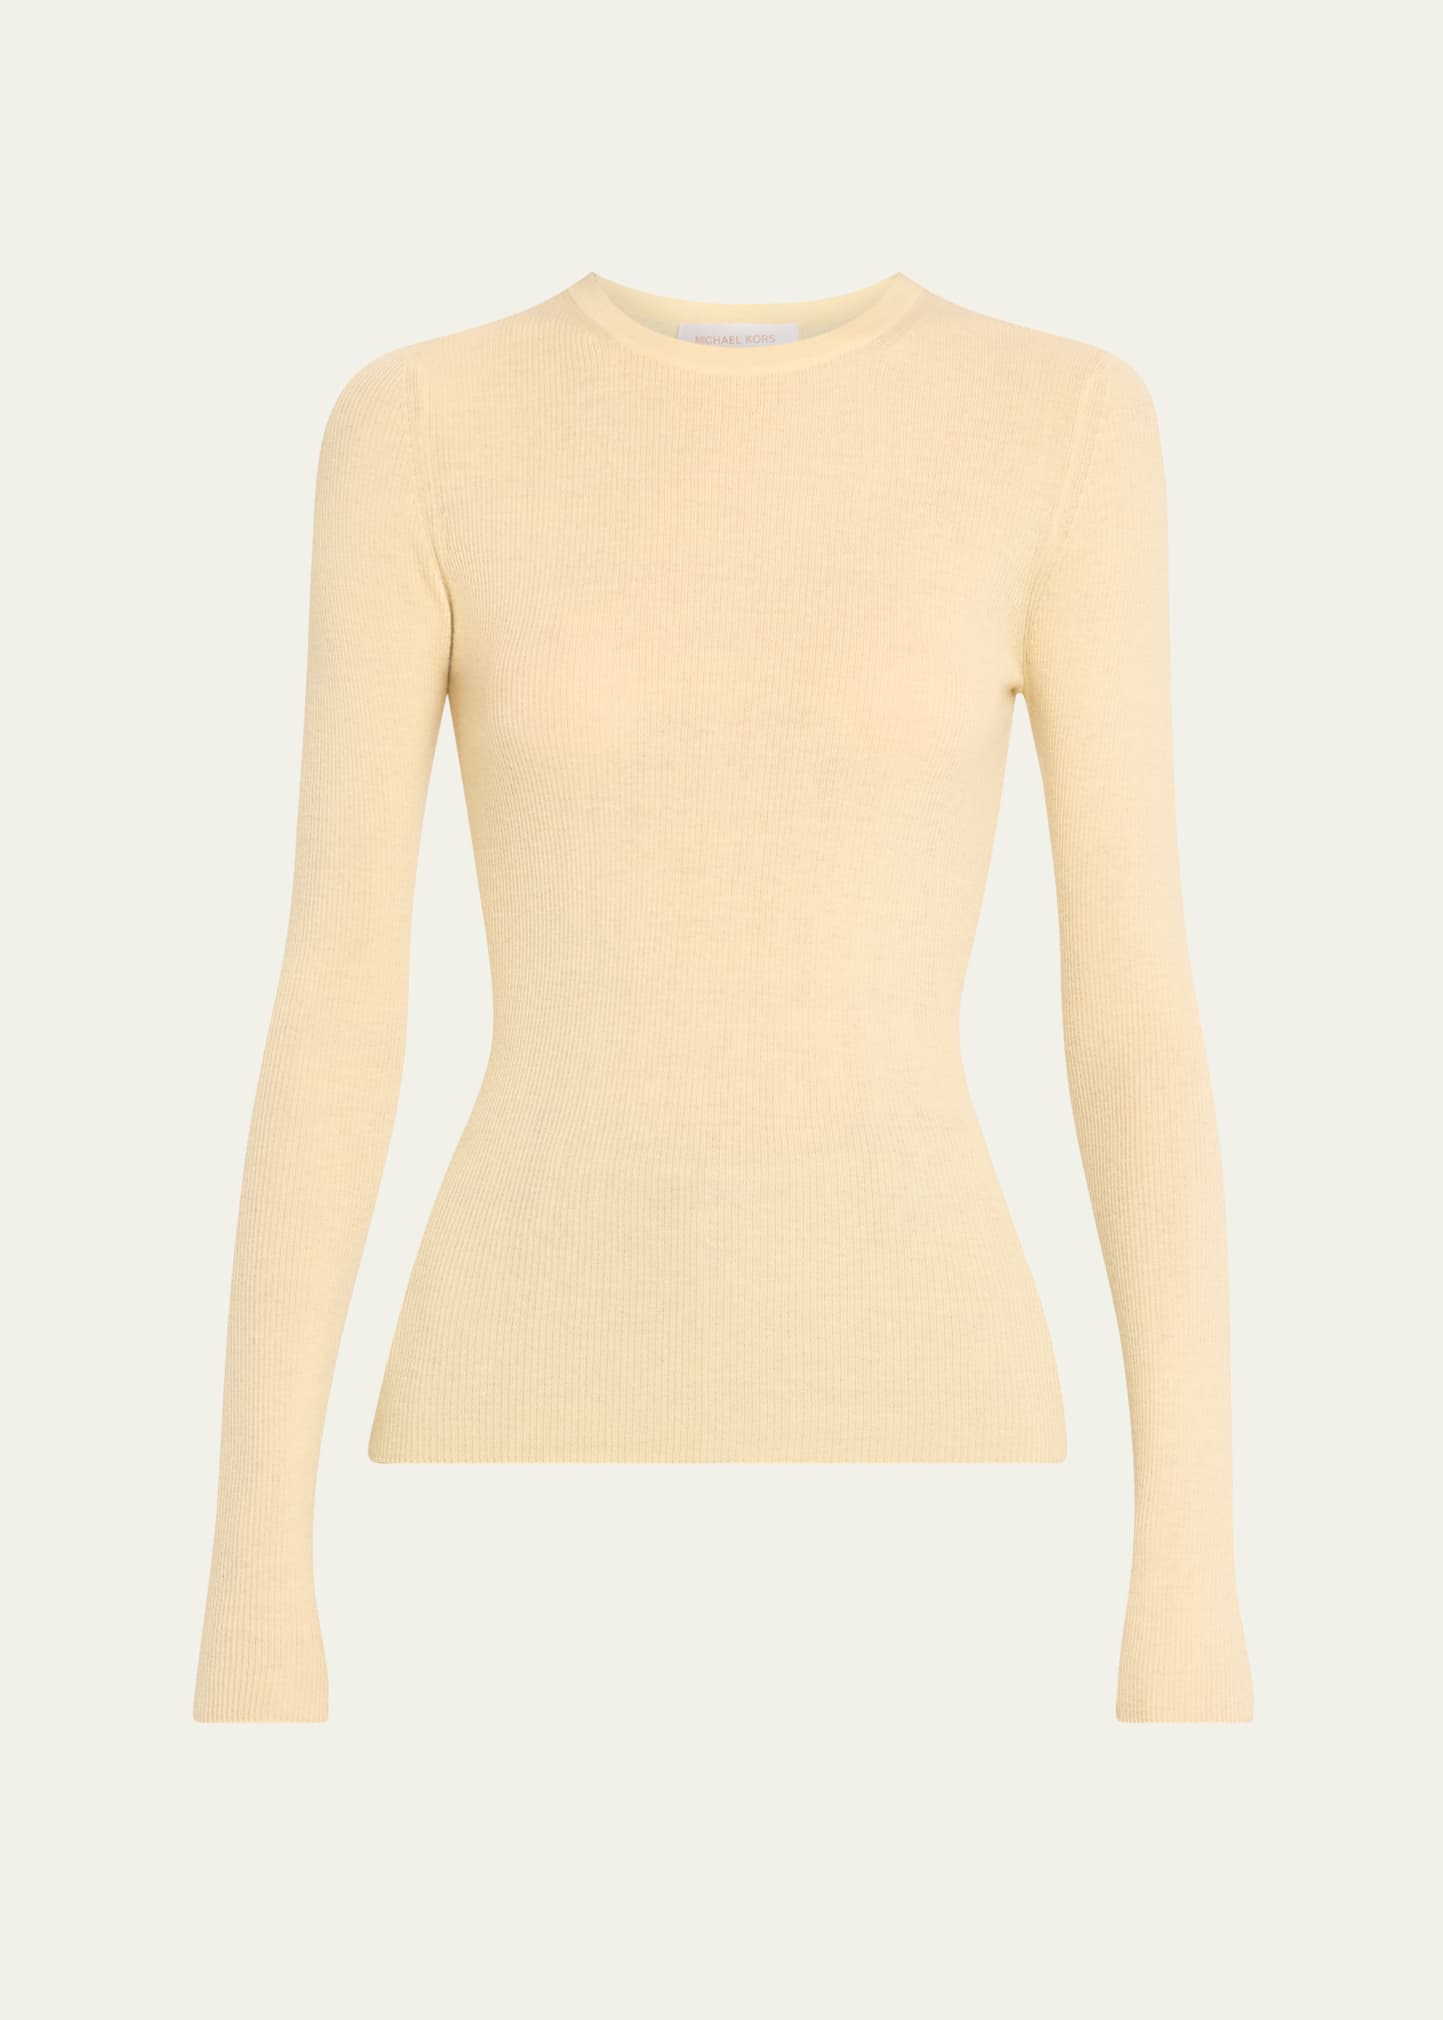 Michael Kors Hutton Ribbed Cashmere Pullover In Parchment